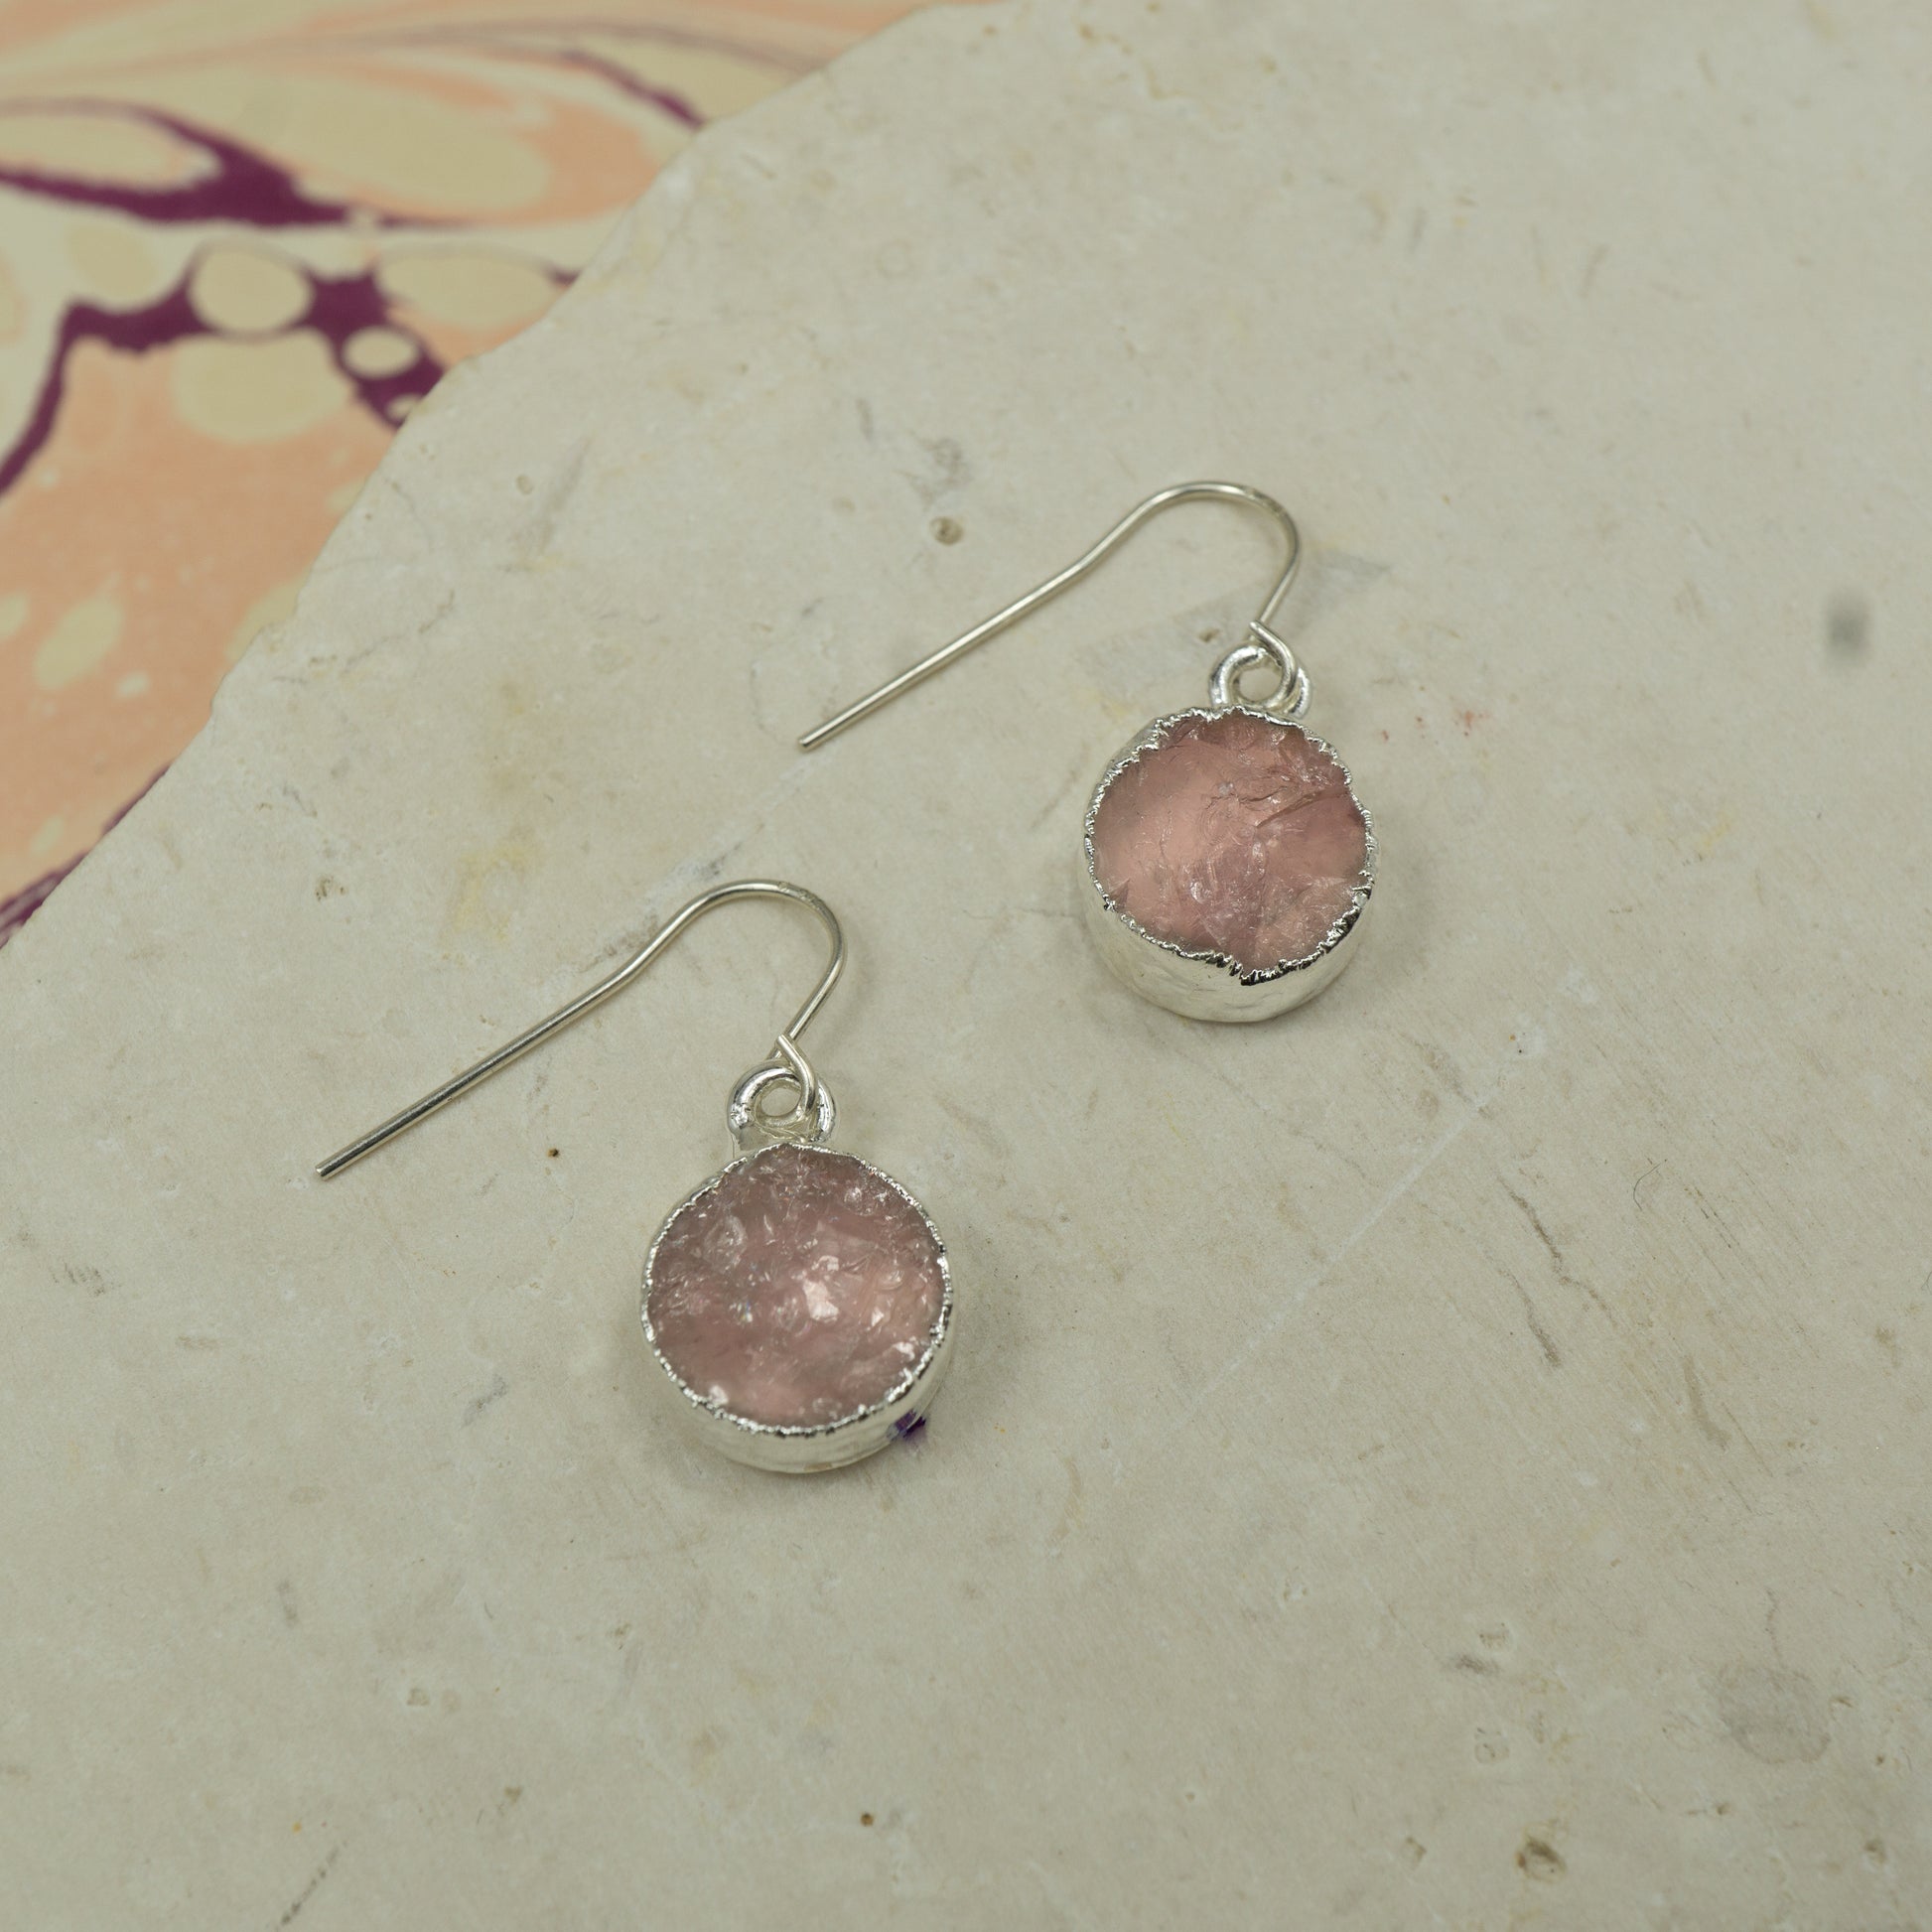 Round raw pink rose quartz earrings on hooks finished in silver.